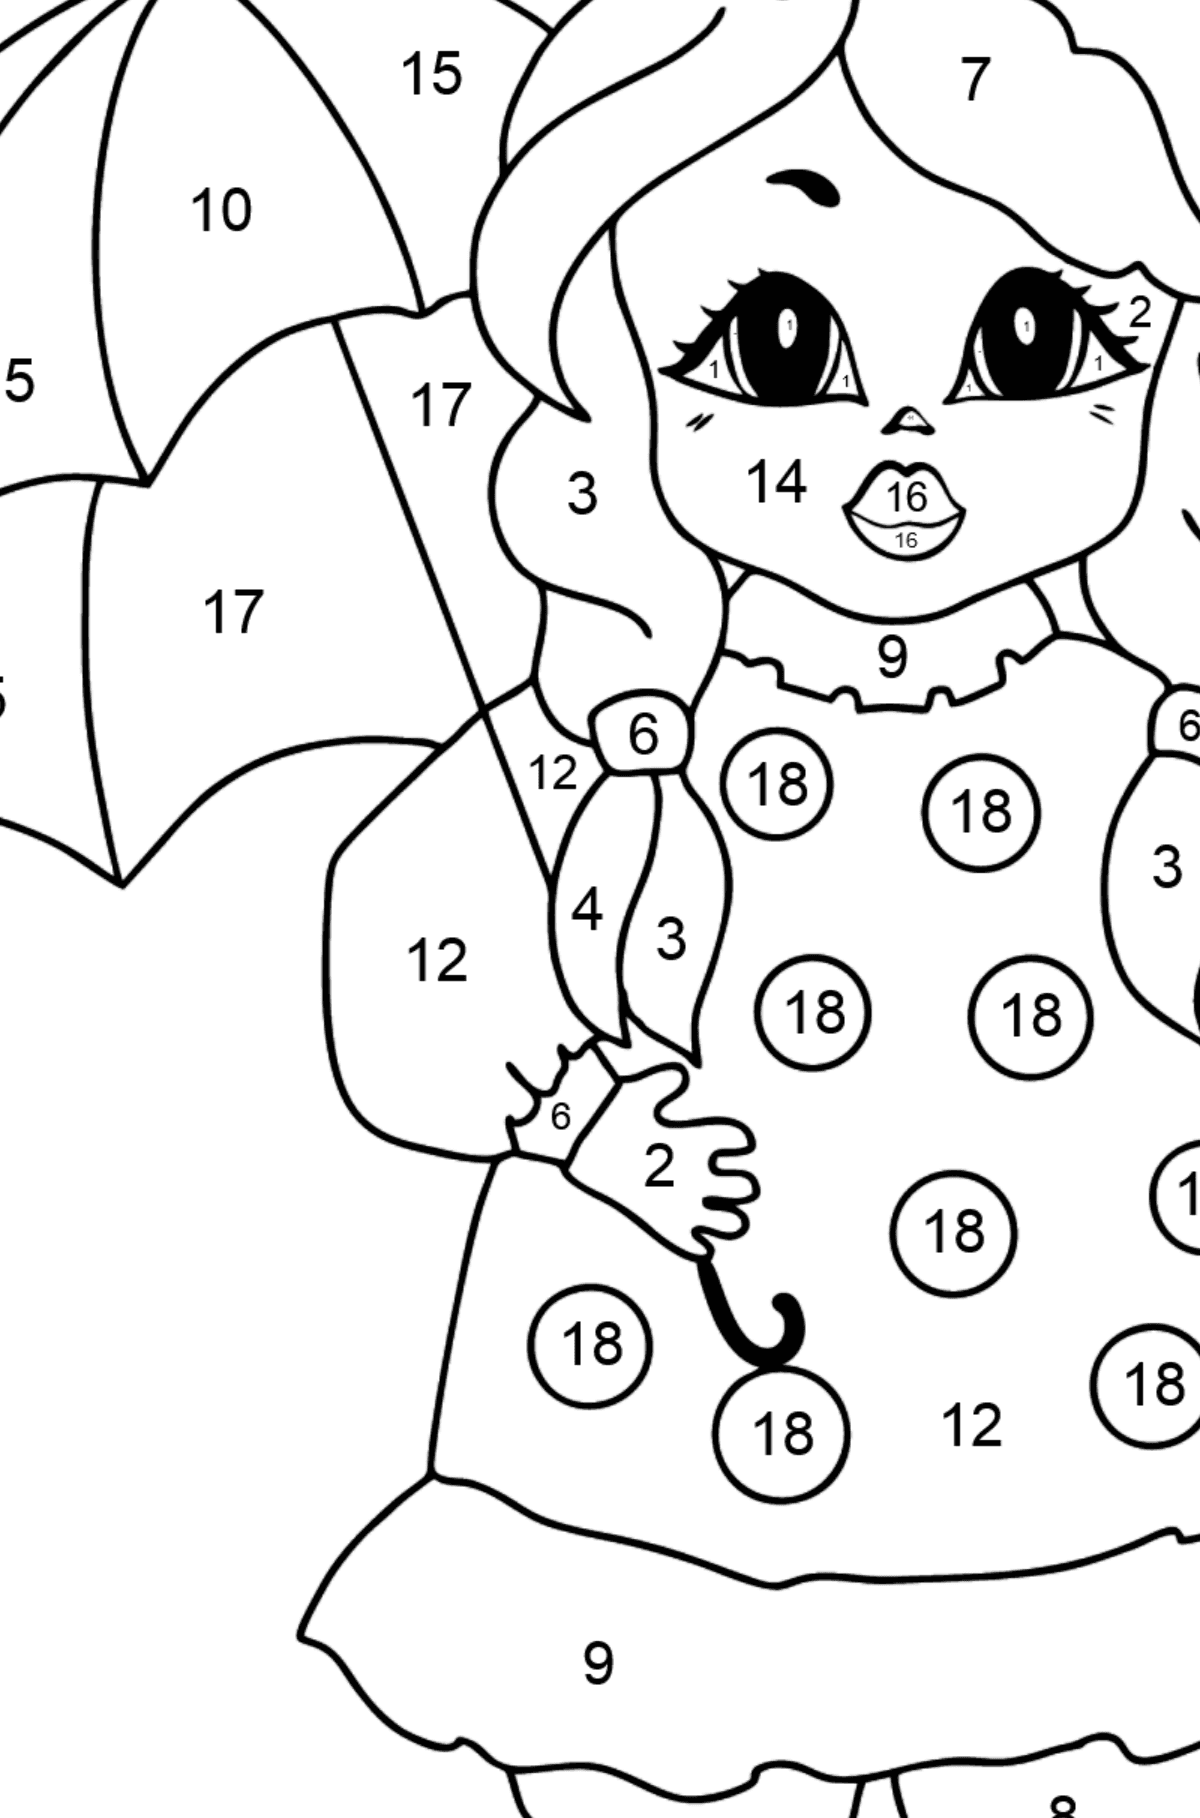 Coloring Page - A Princess with an Umbrella - For Girls - Coloring by Numbers for Kids